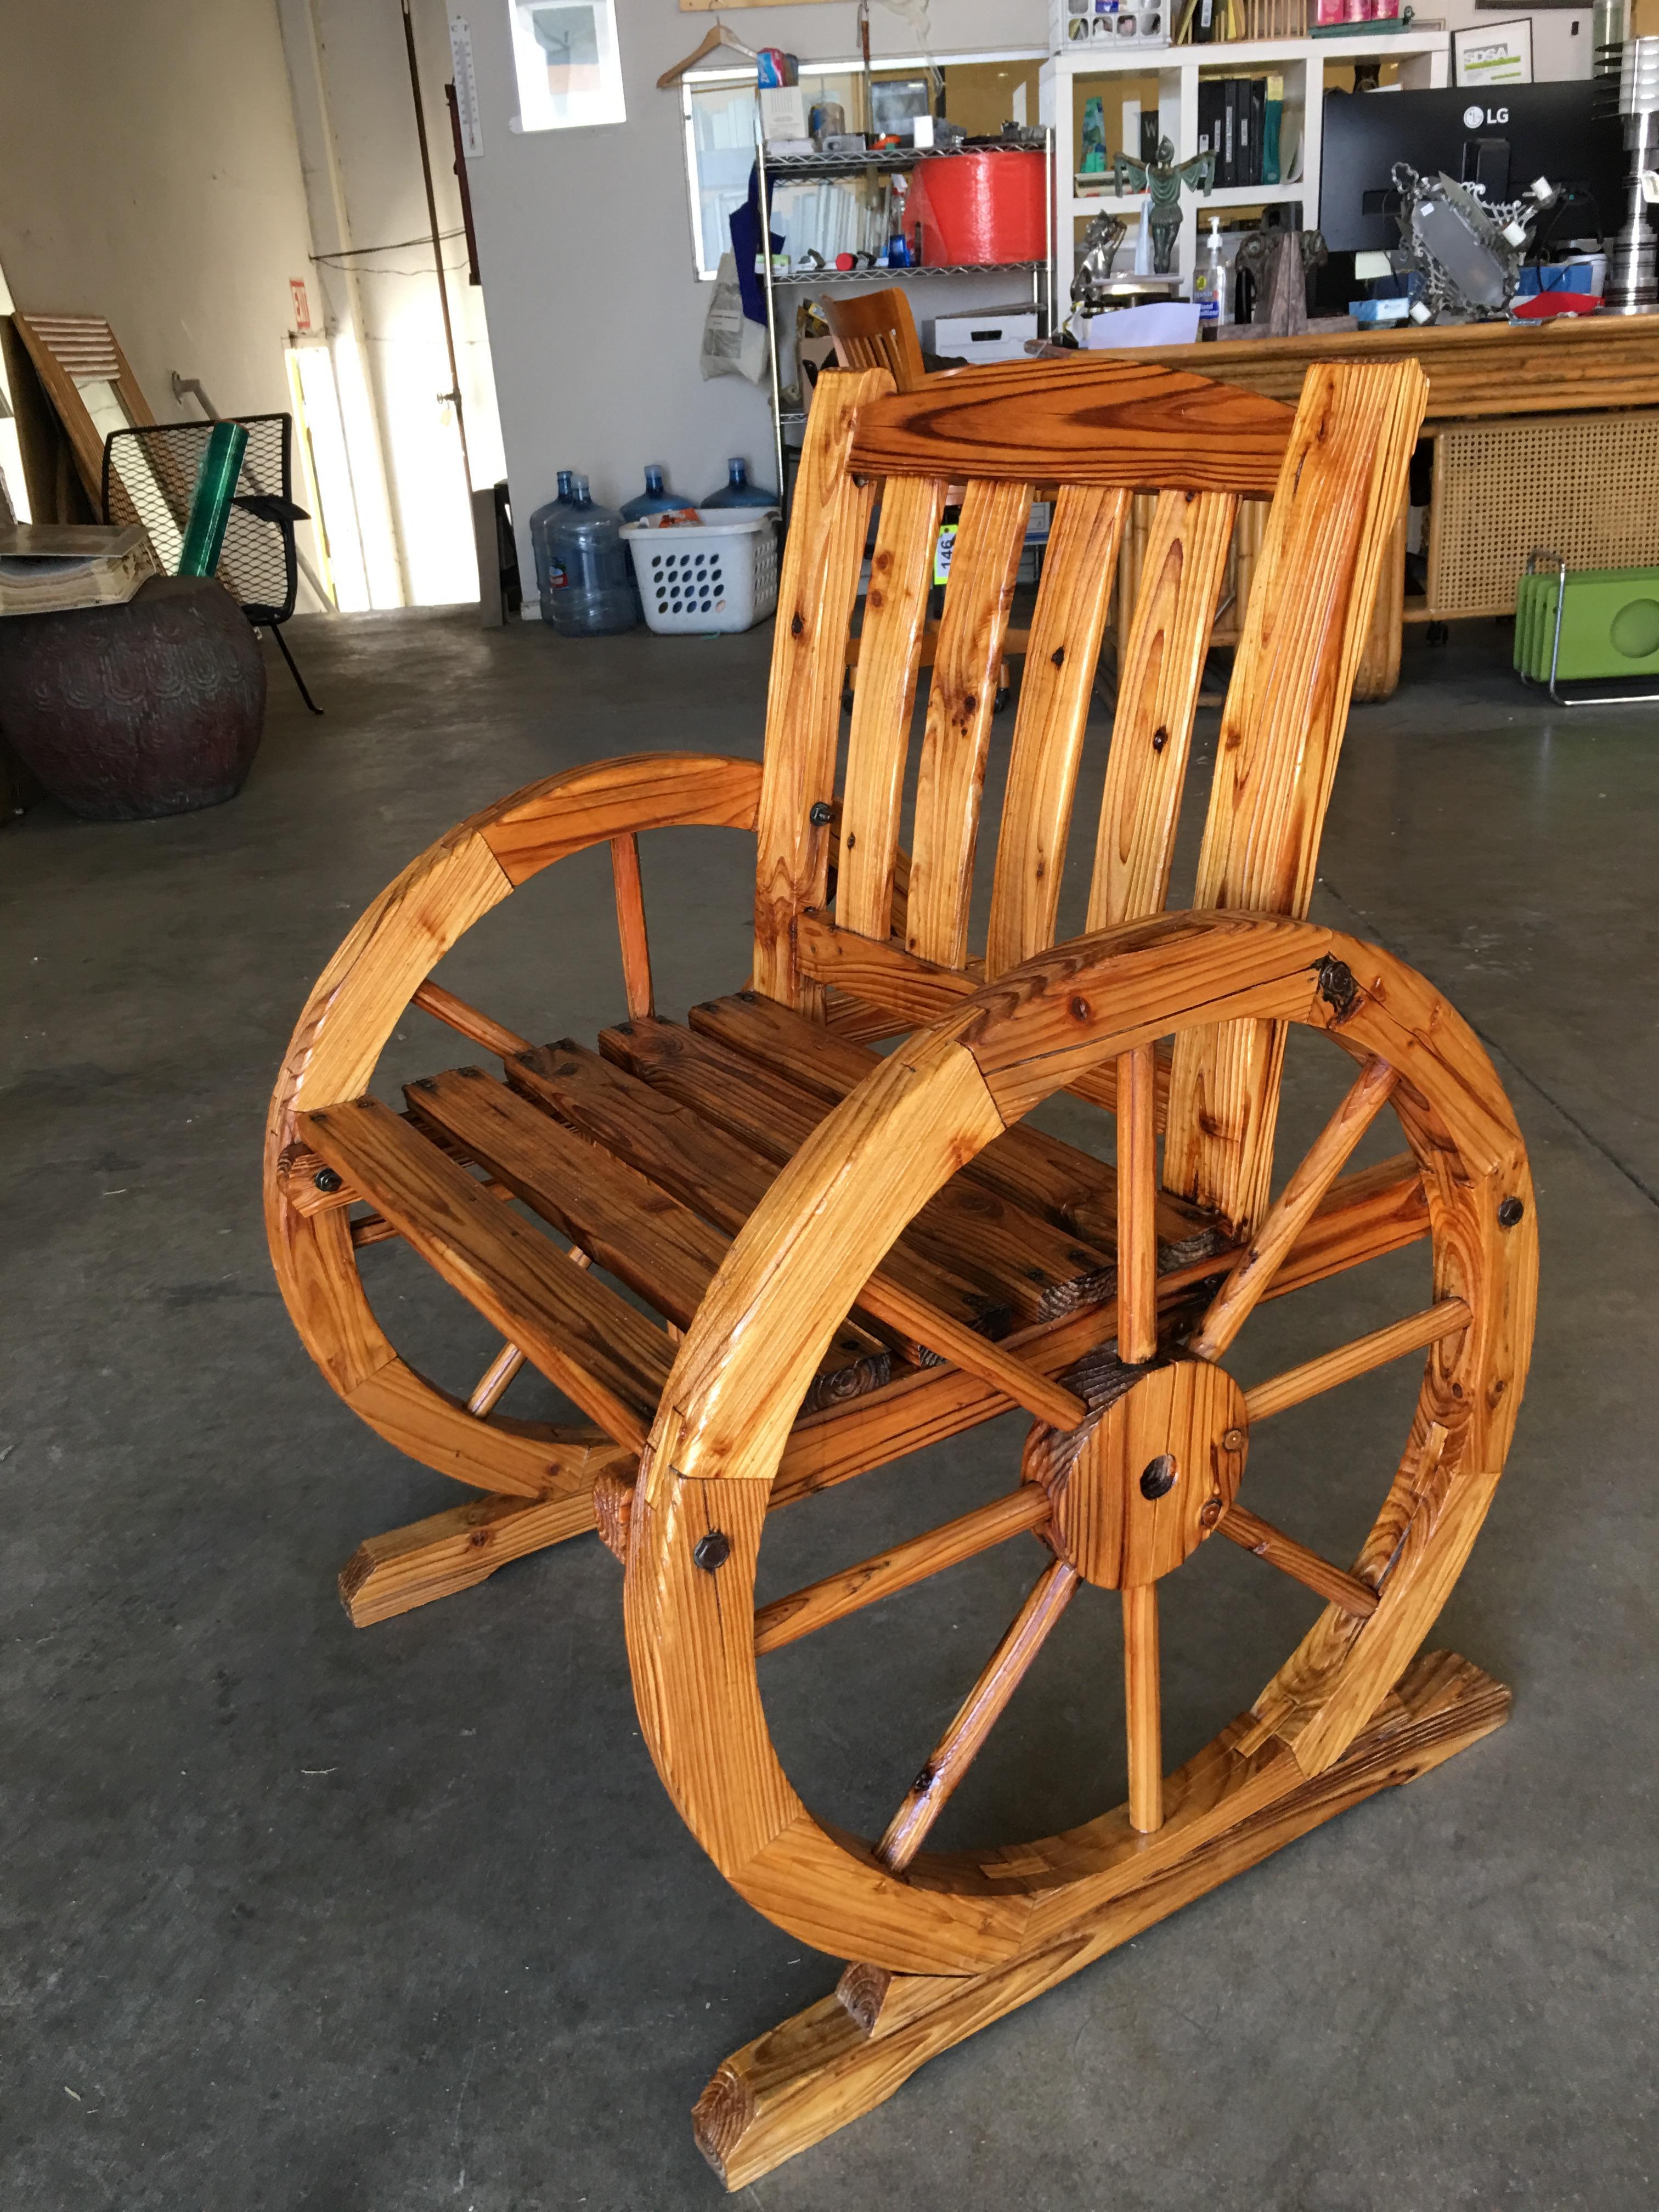 Western Folk Art Wagon Wheel Table and Chairs Set, 1960 In Excellent Condition For Sale In Van Nuys, CA